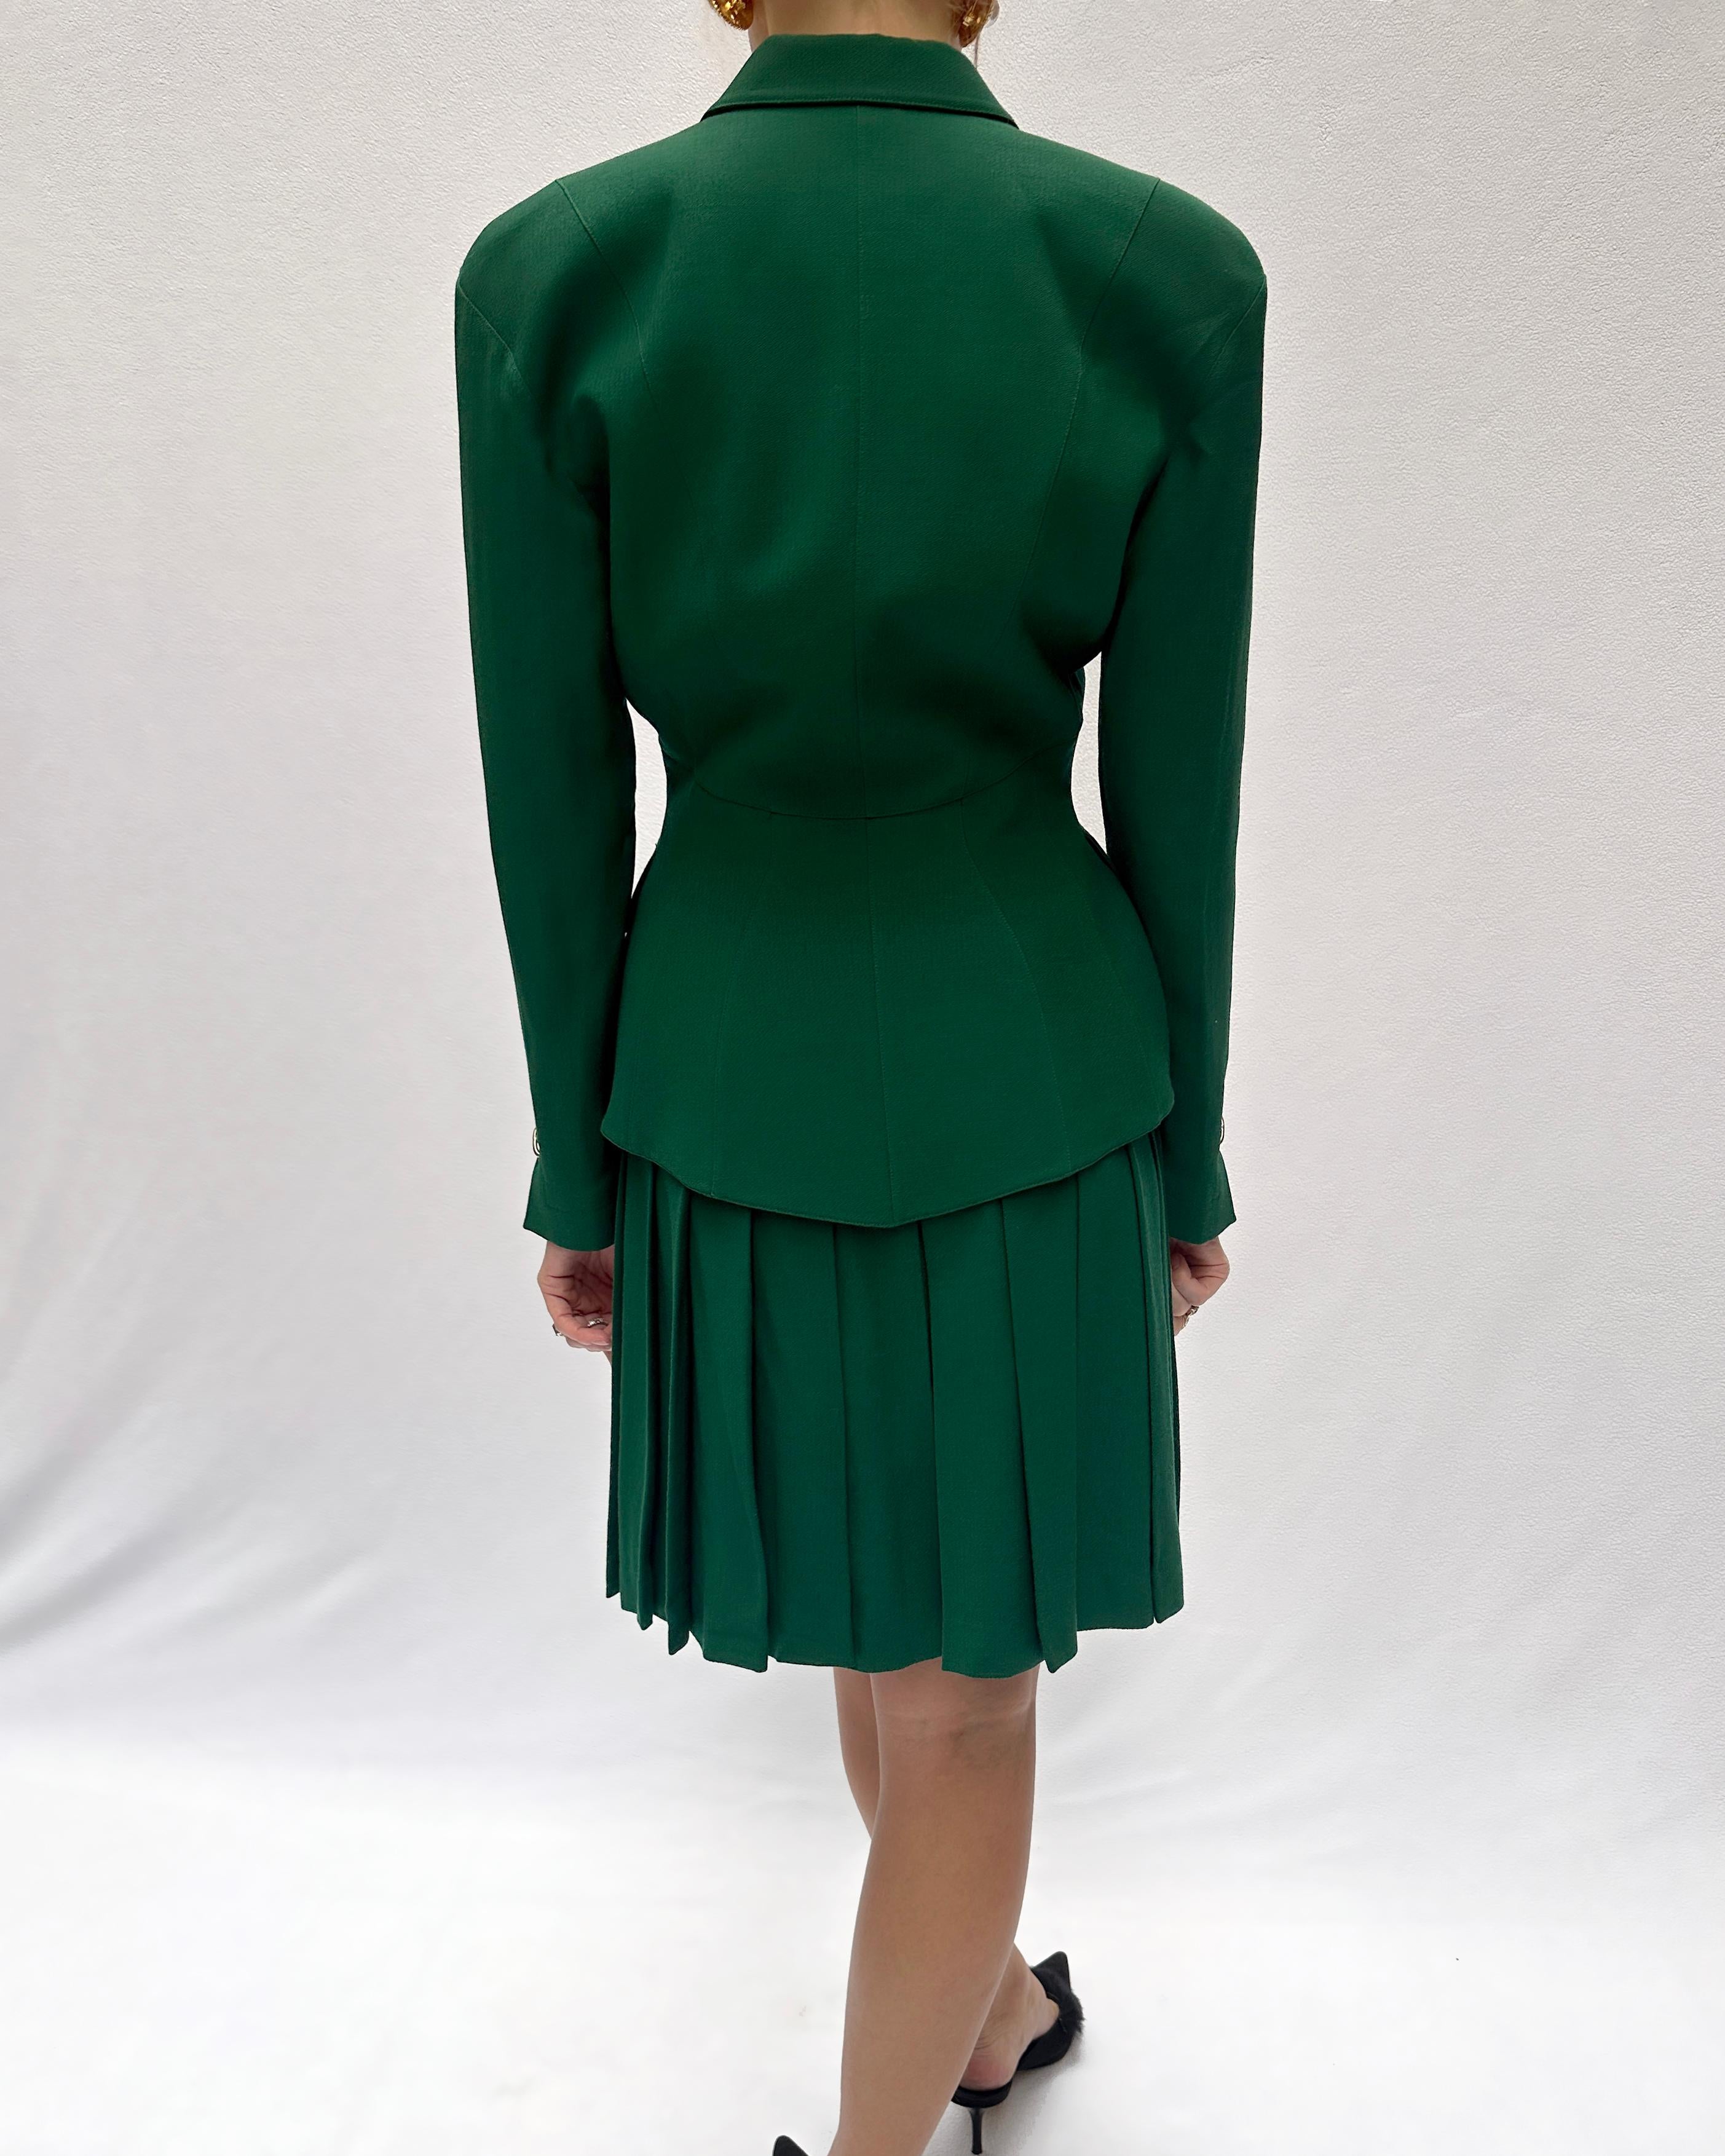 Vintage Thierry Mugler Fall 1992 Emerald Jacket + Pleated Skirt Suit For Sale 10